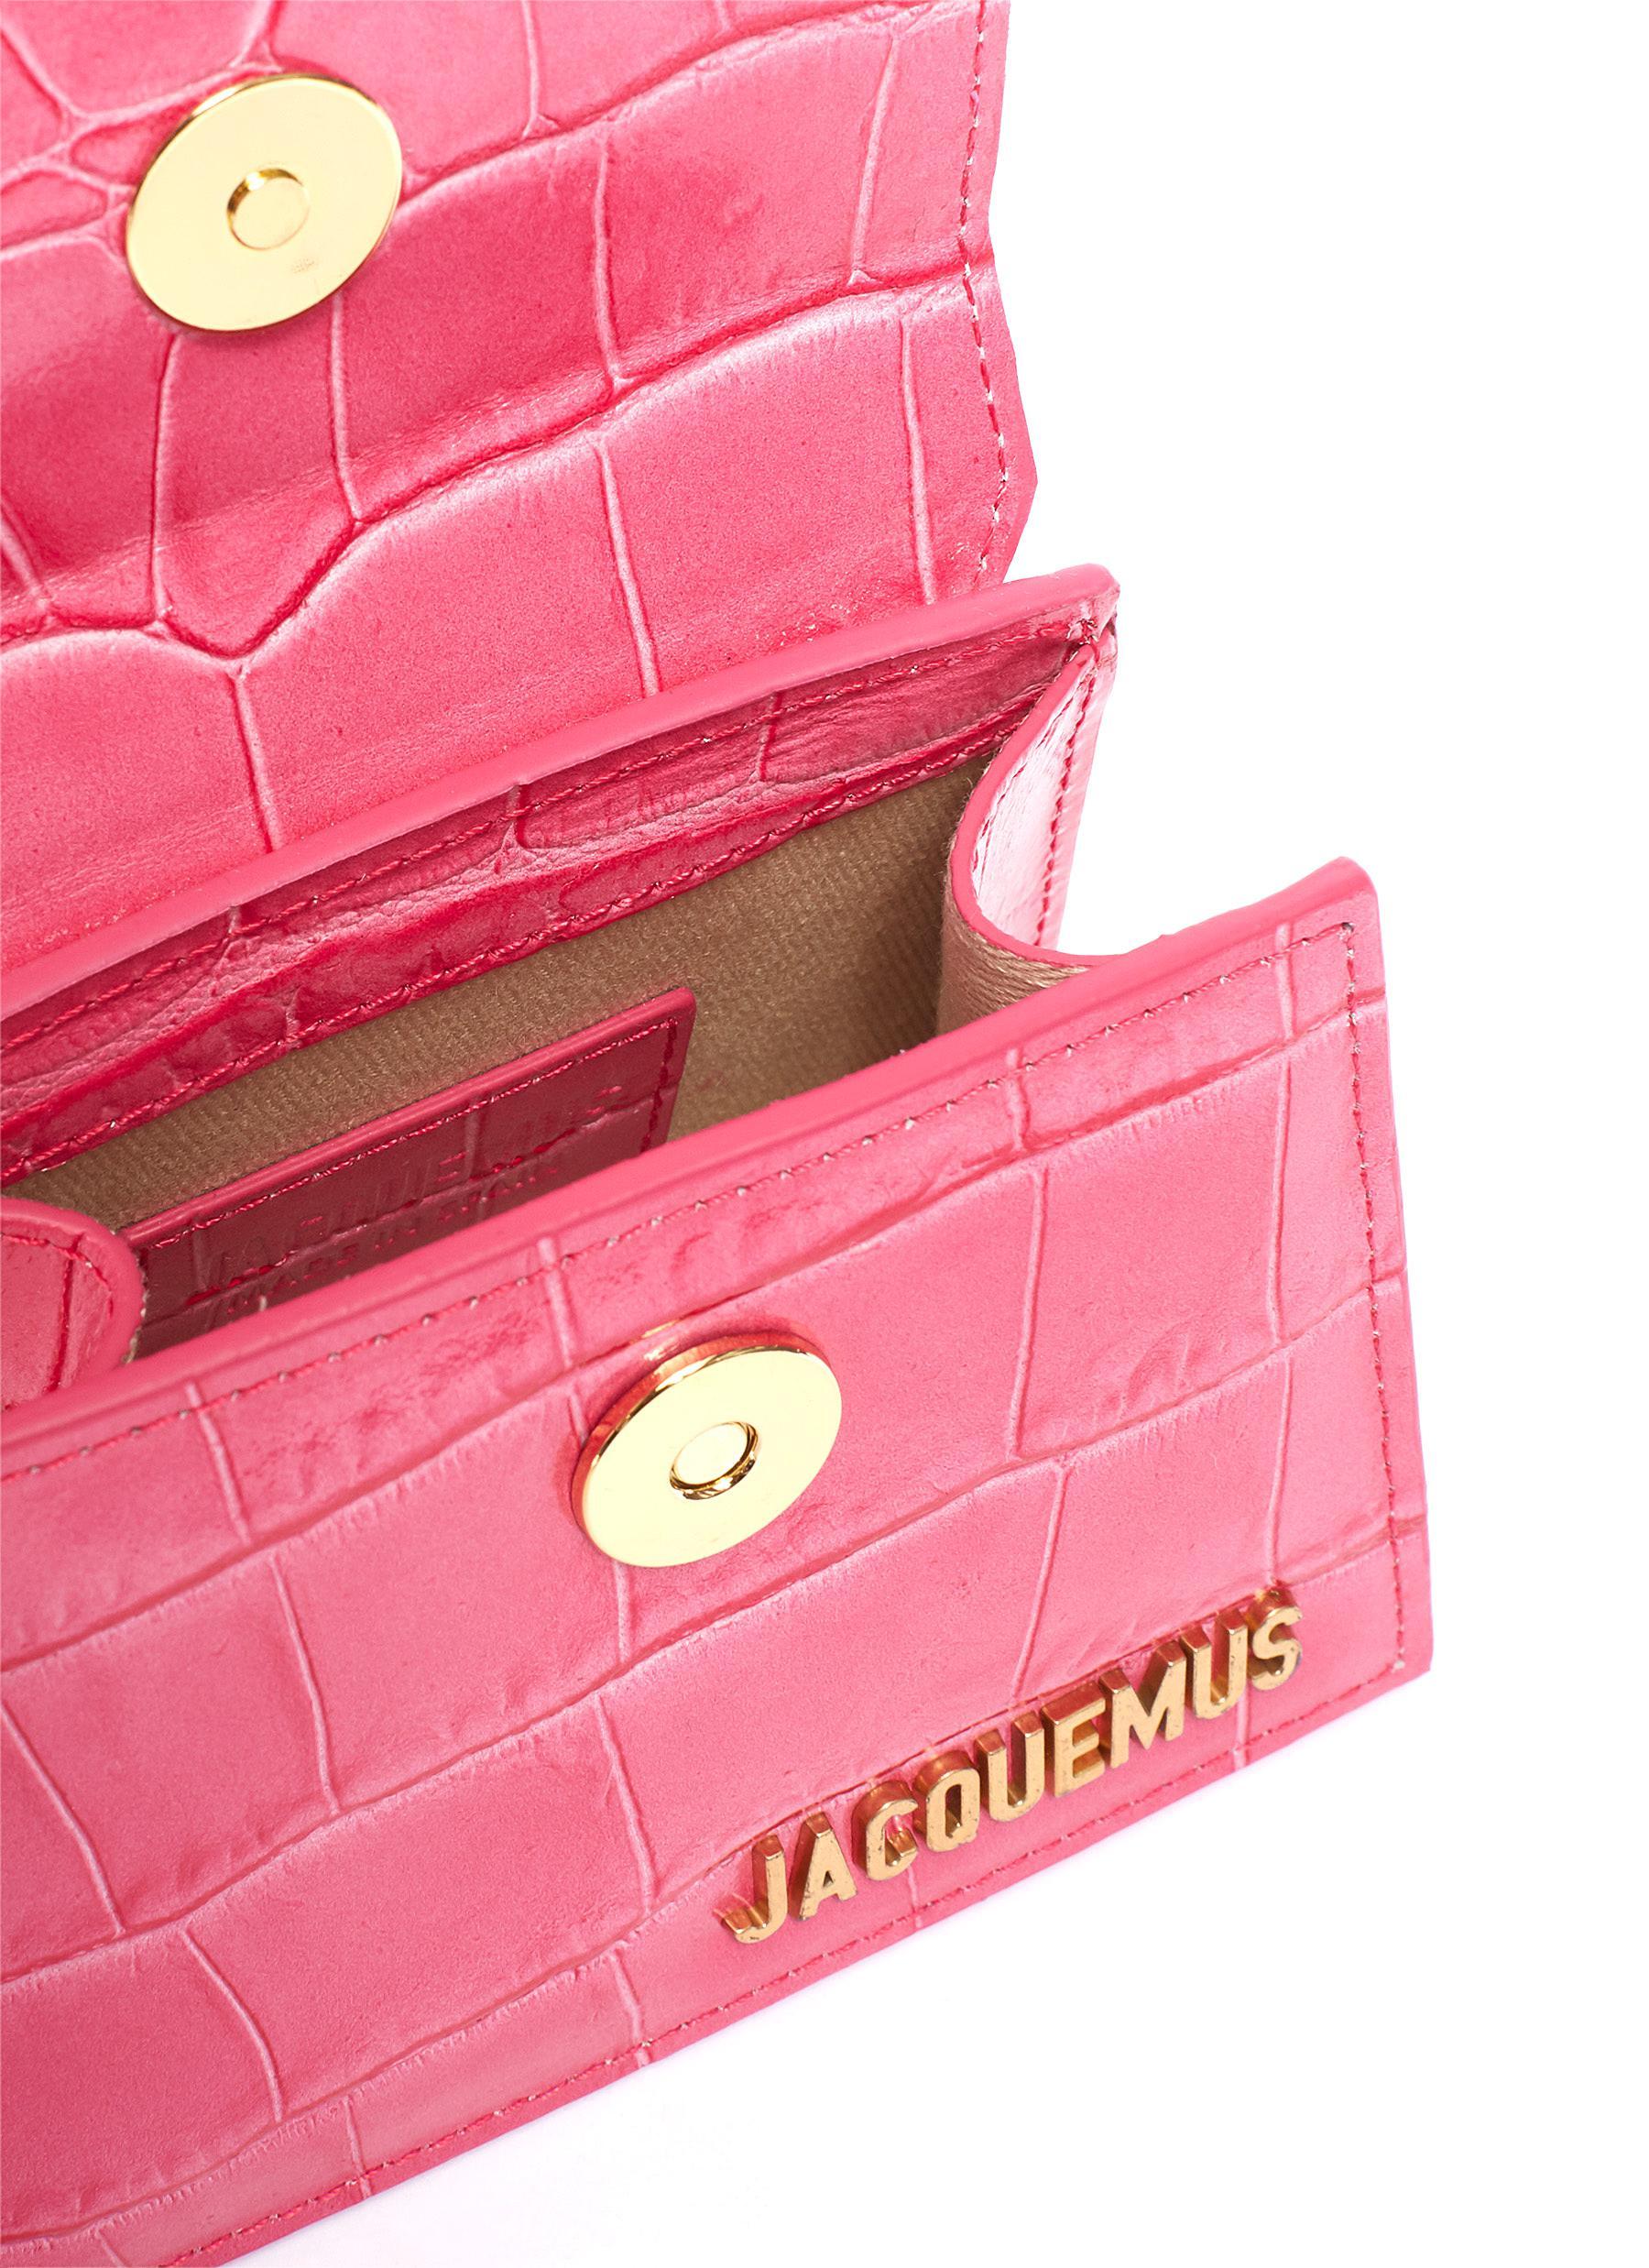 Jacquemus 'le Chiquito' Micro Croc Embossed Leather Top Handle Bag 